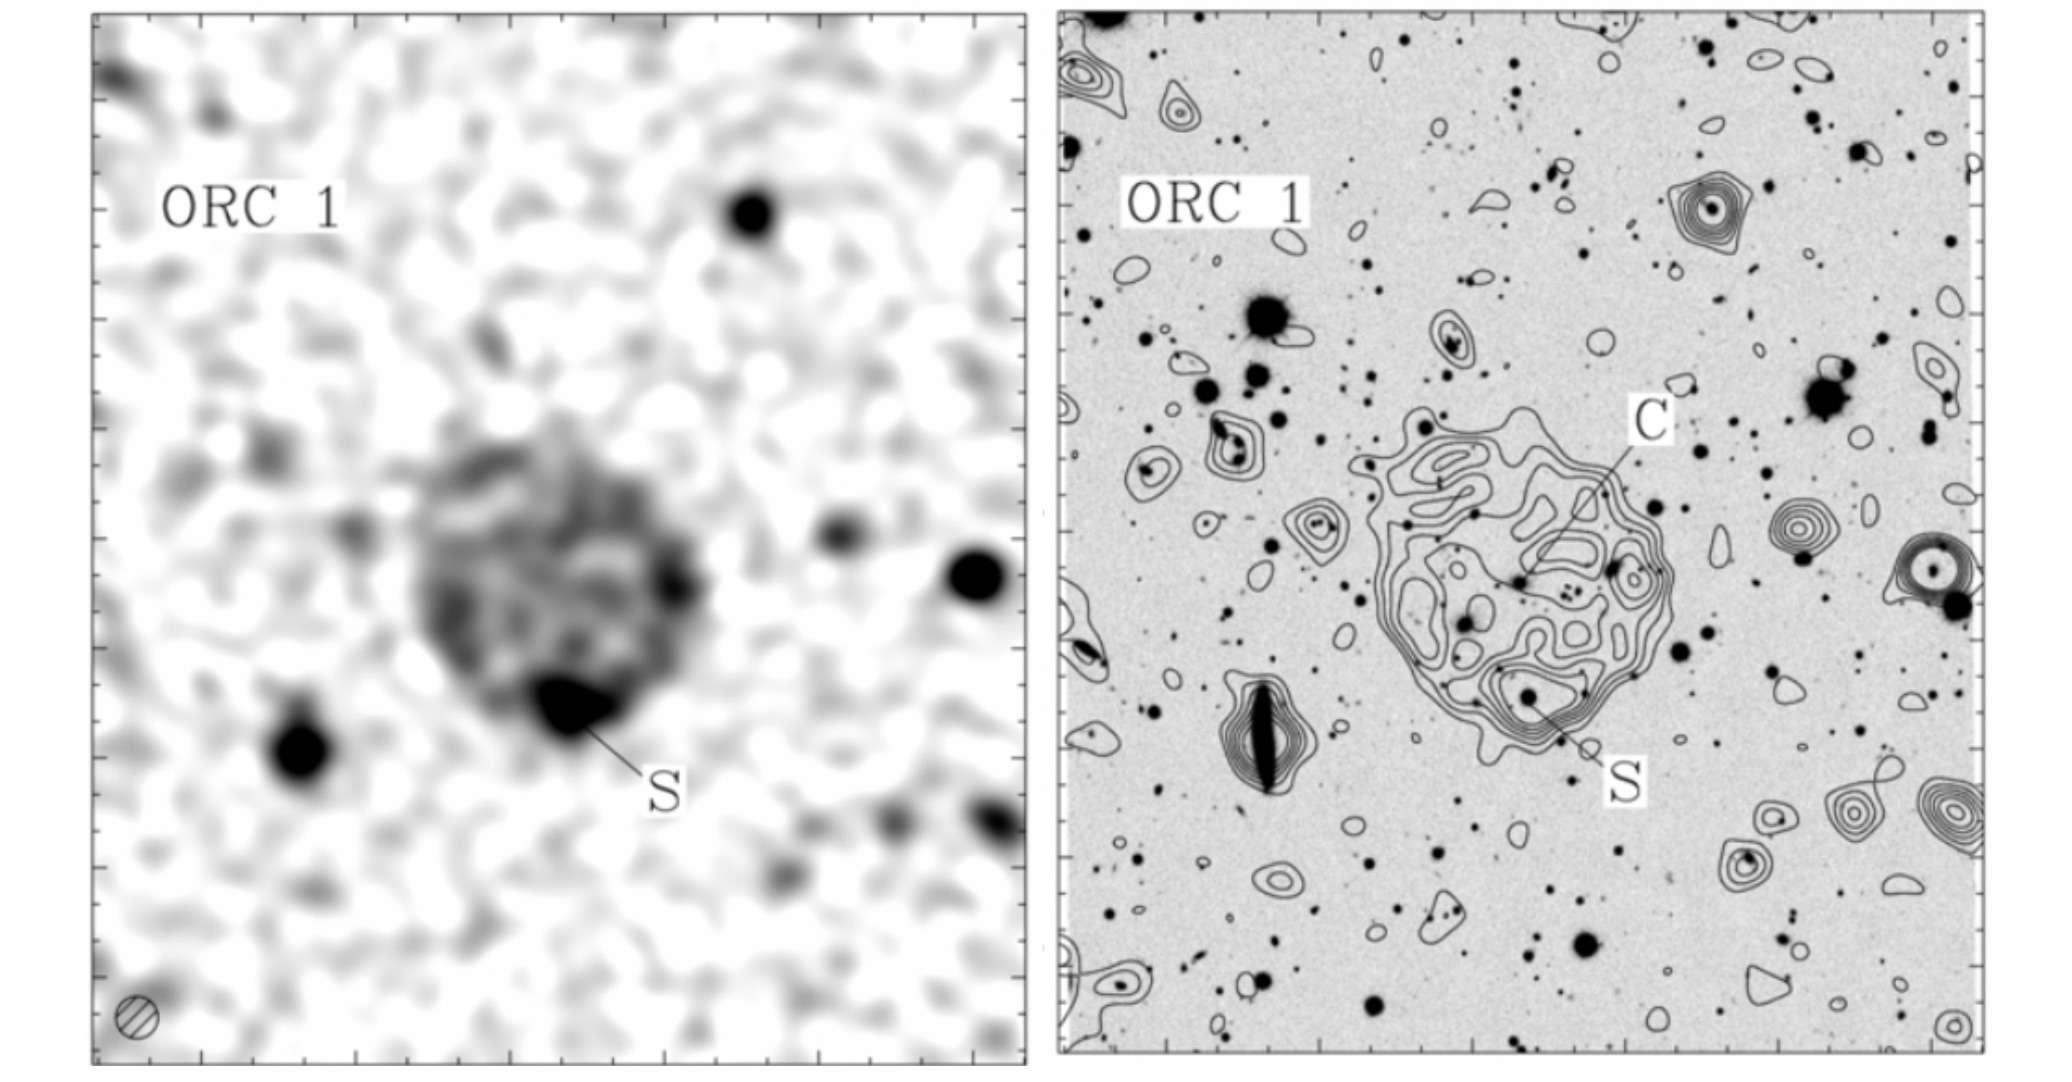 ORC 1, a ring of radio emission in the sky that is as yet unexplained. Credit: Norris et al.